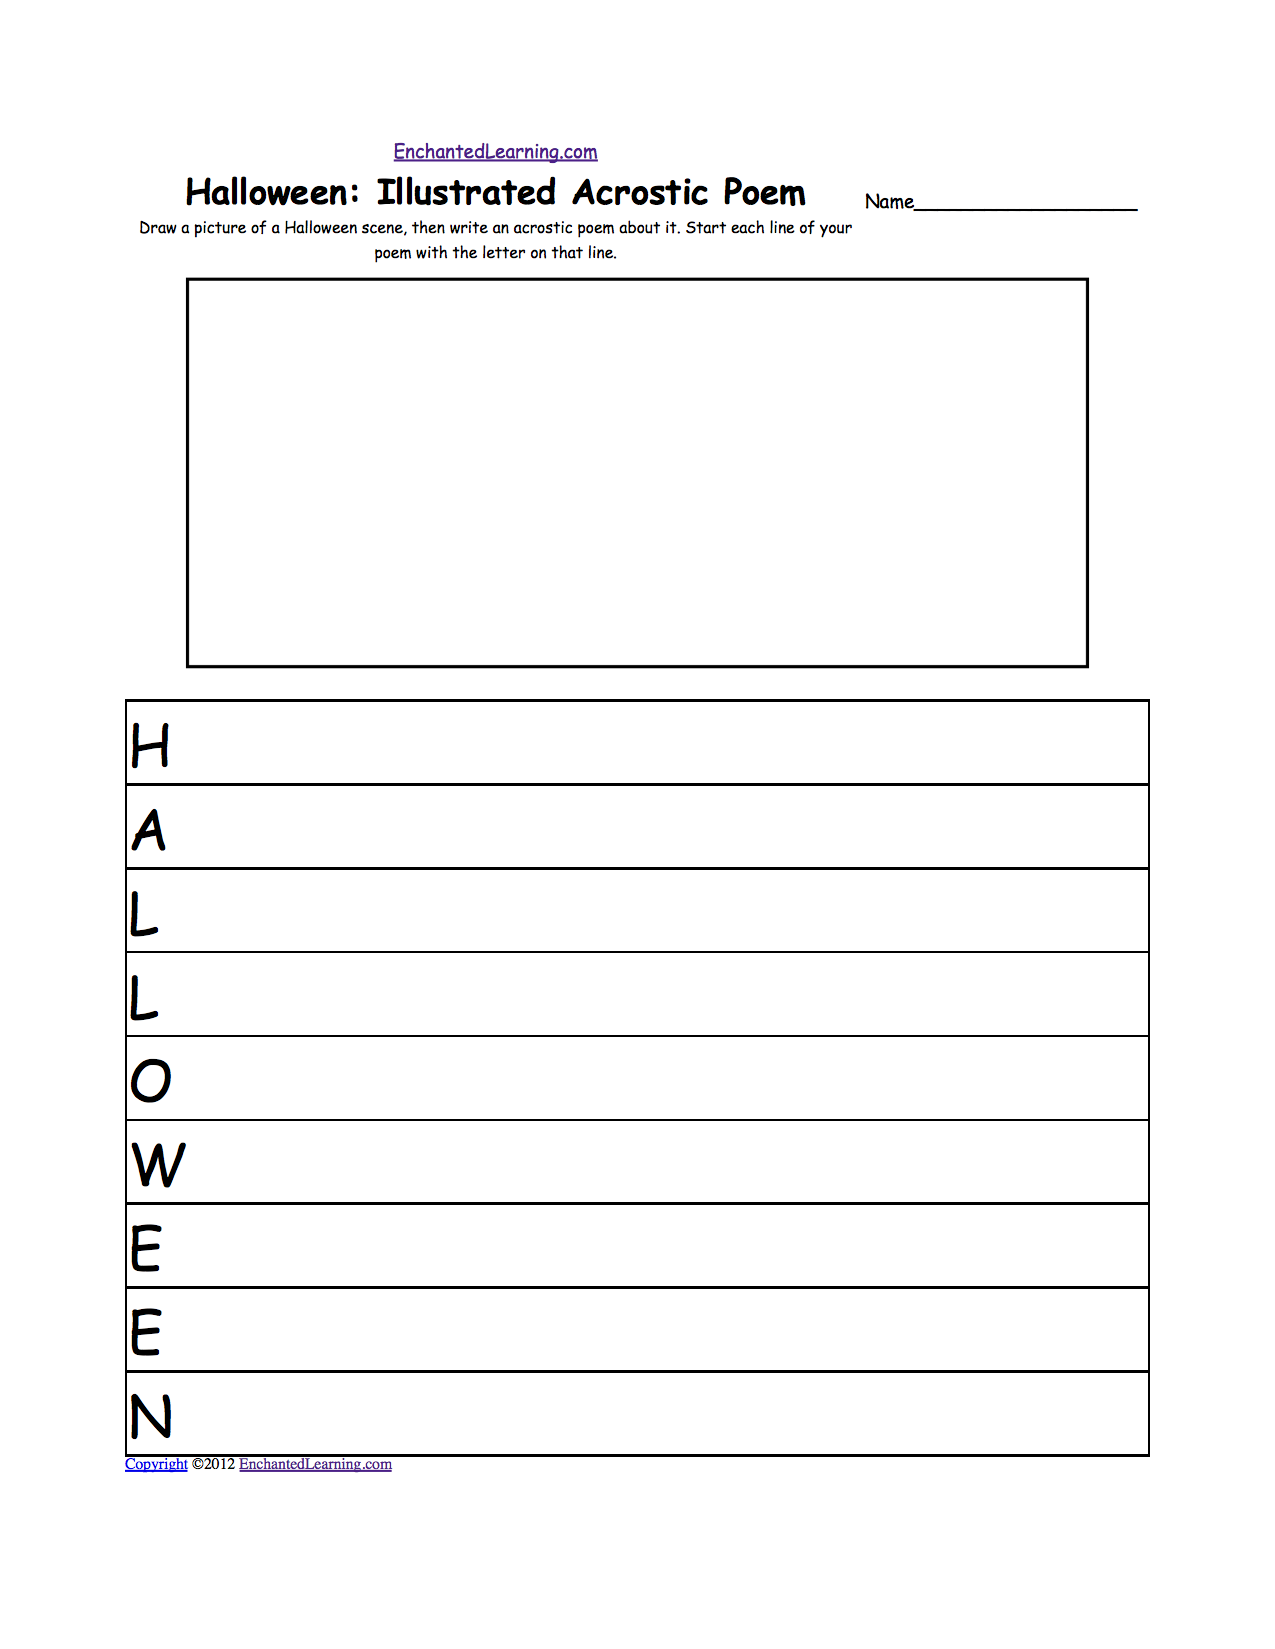 Funny Story Fill in Blank Halloween Acrostic Poems plus Generate Your Own Poetry Worksheets 